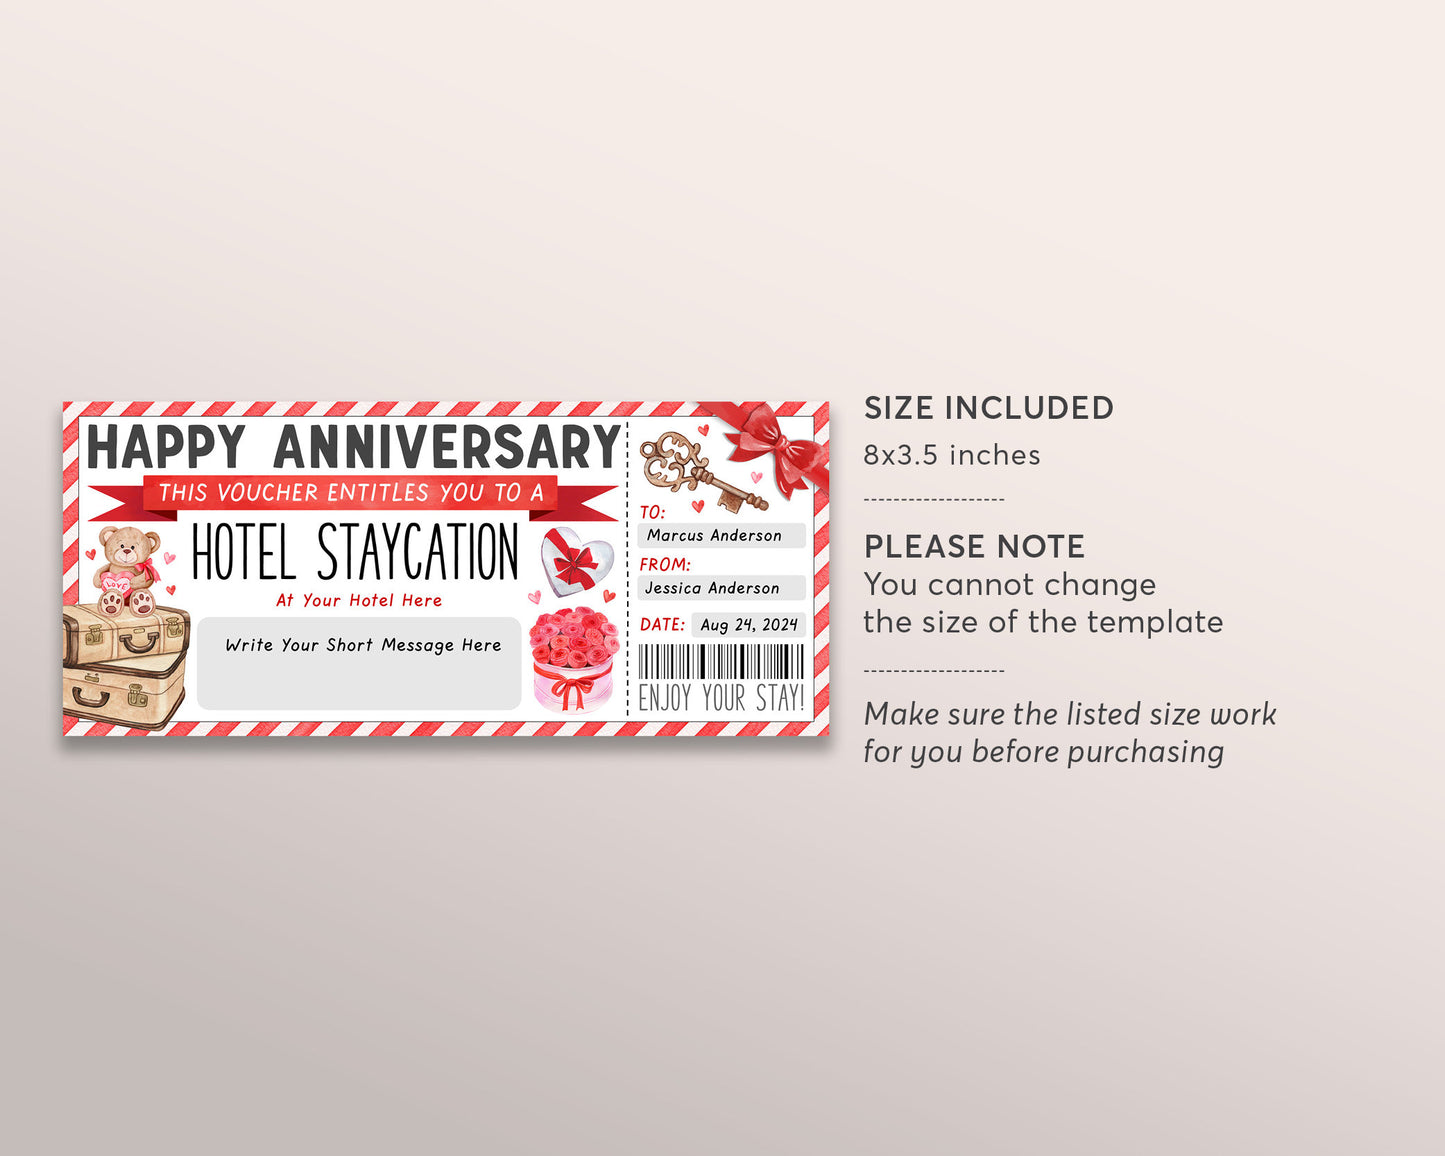 Hotel Staycation Voucher Editable Template, Wedding Anniversary Surprise Hotel Reservation For Wife Husband, Getaway Ticket Gift Certificate